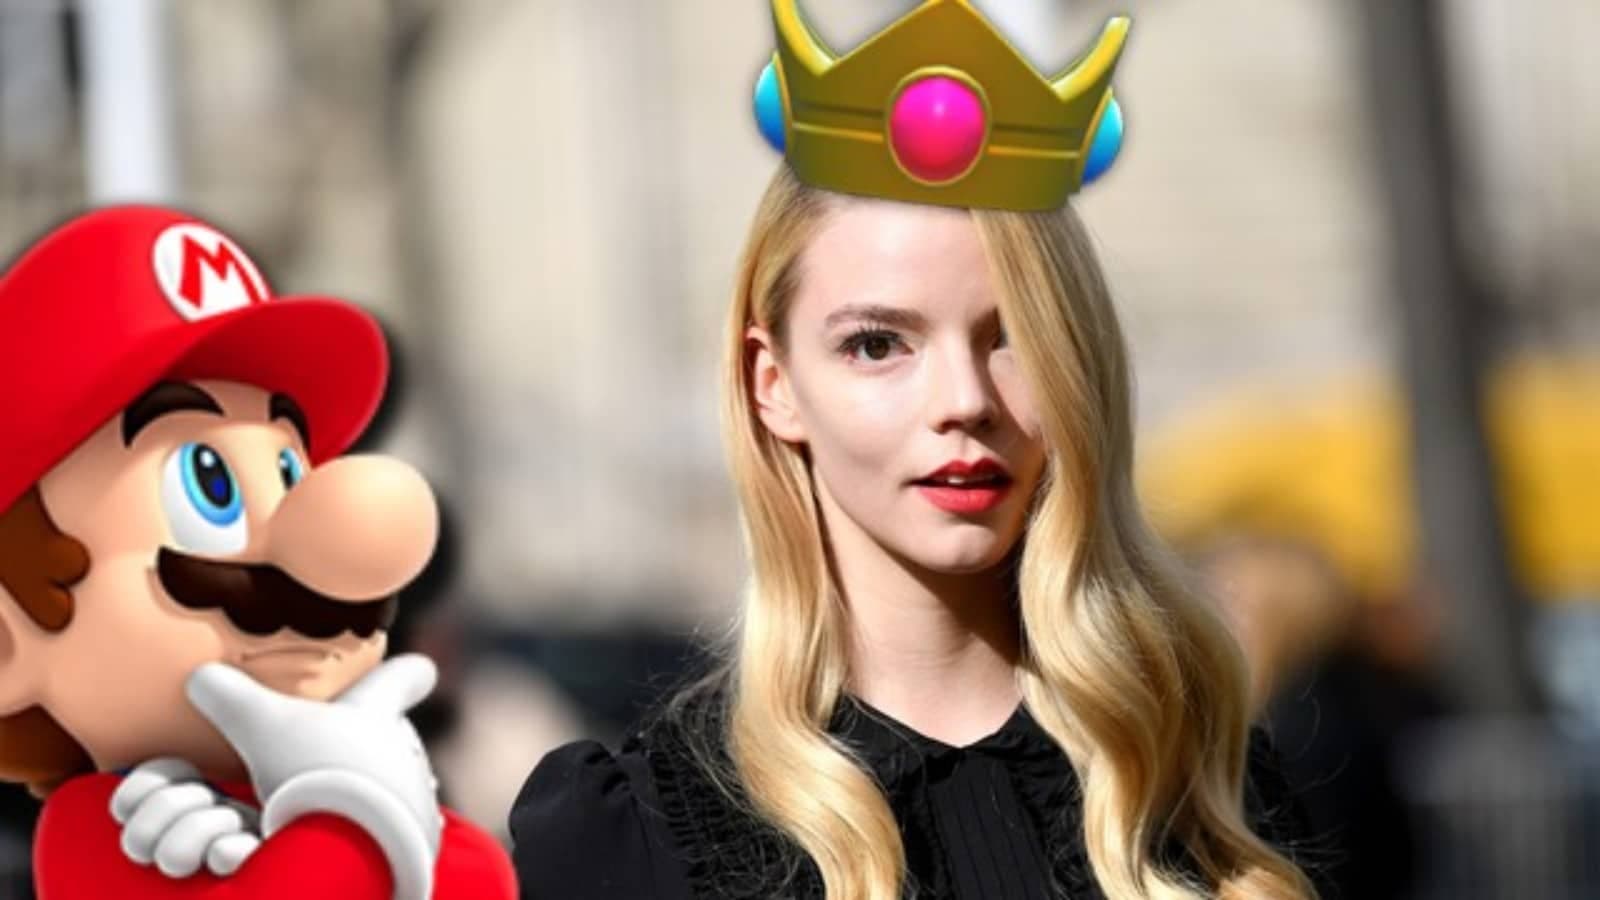 This is how Anya Taylor-Joy fans react to the Peach outfit